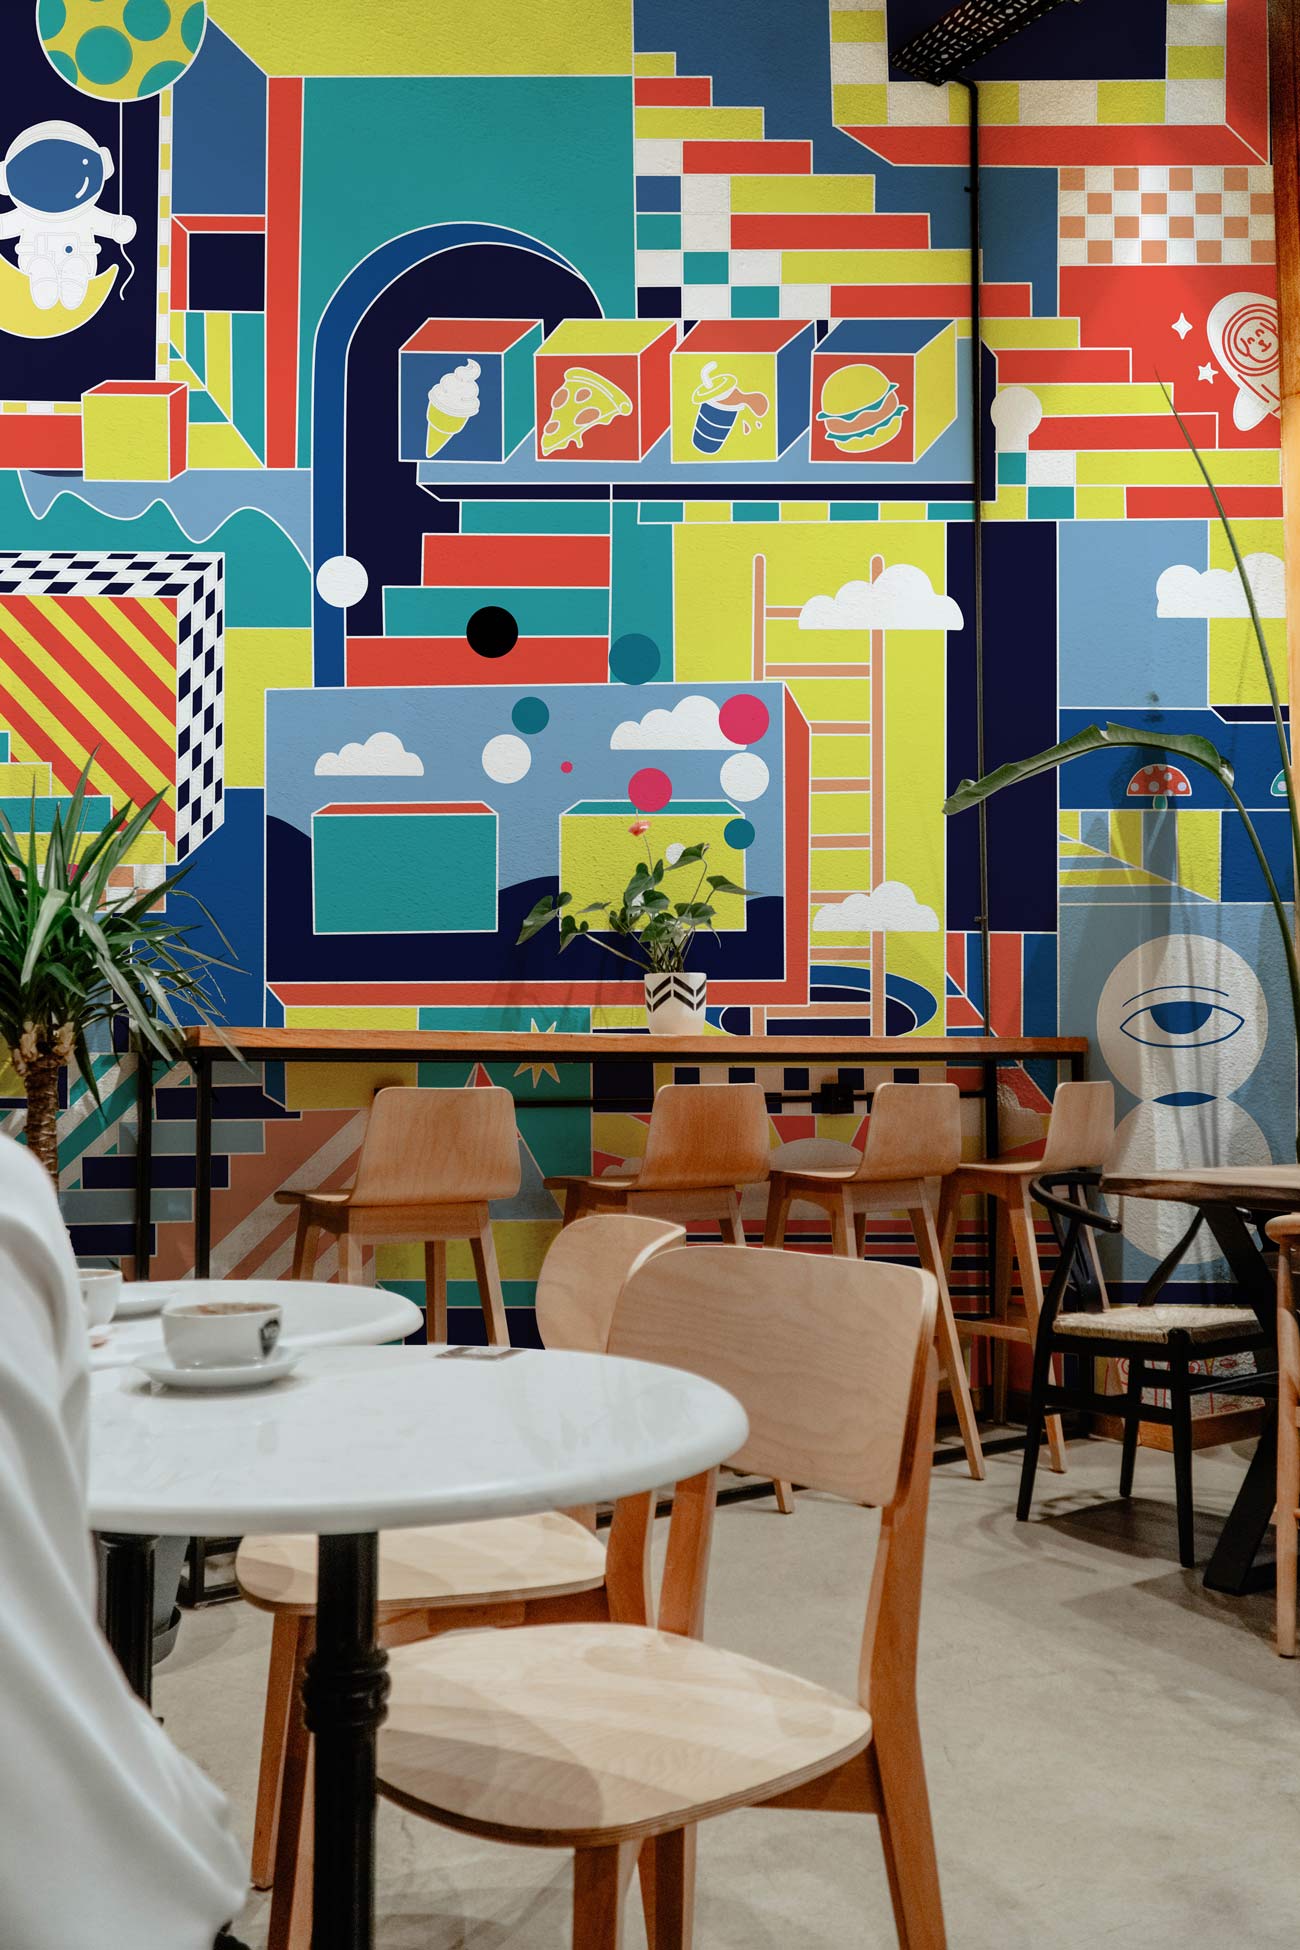 Mural Wallpaper Design Featuring the Colorful Parallel World Office for Restaurant Decoration